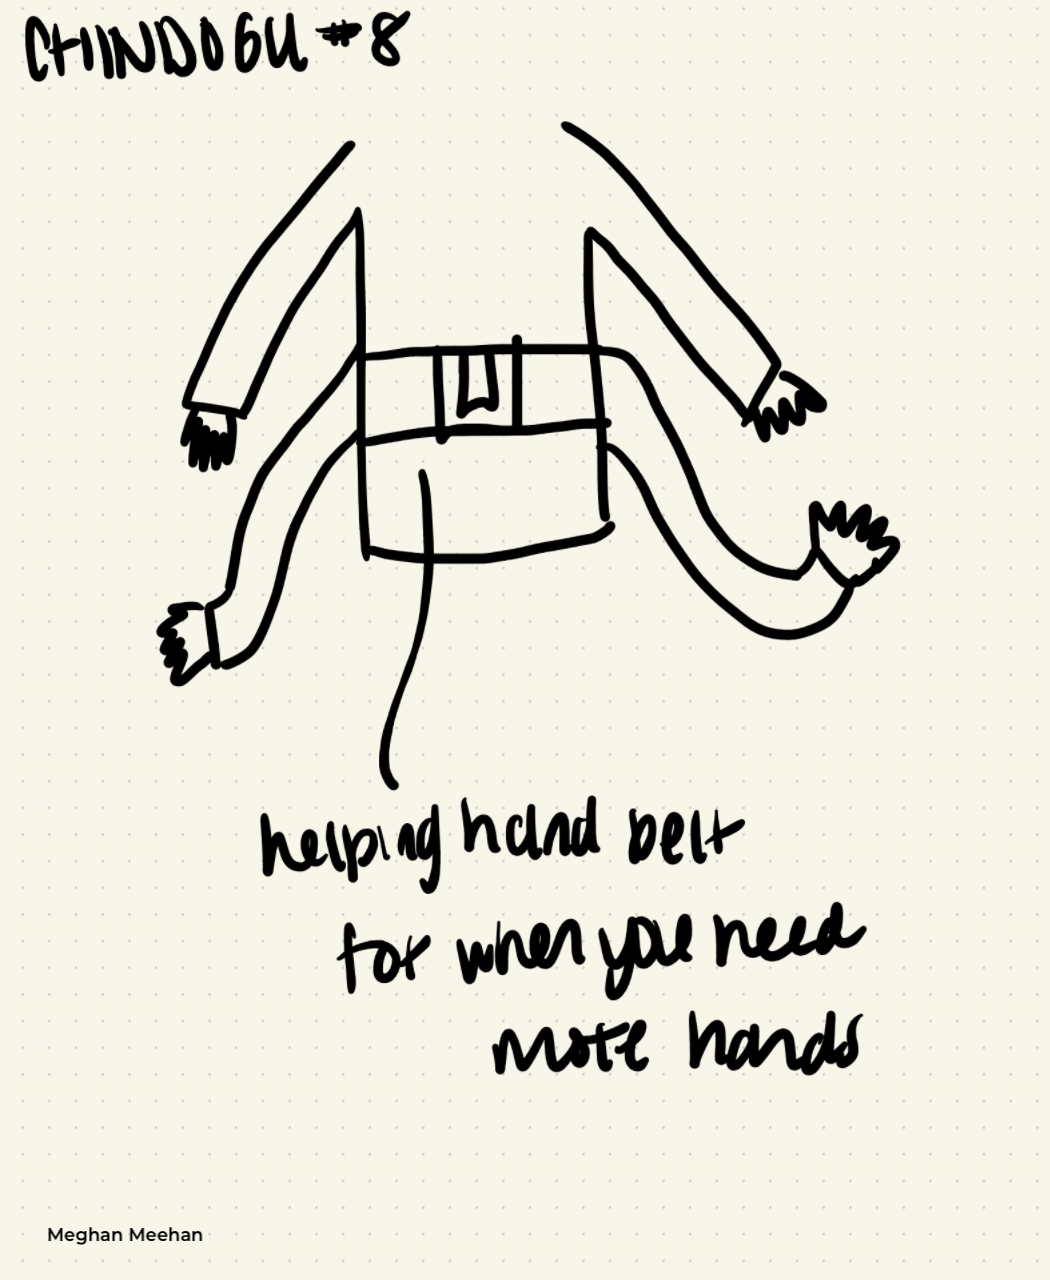 Helping Hand Belt product design by Meghan Meehan